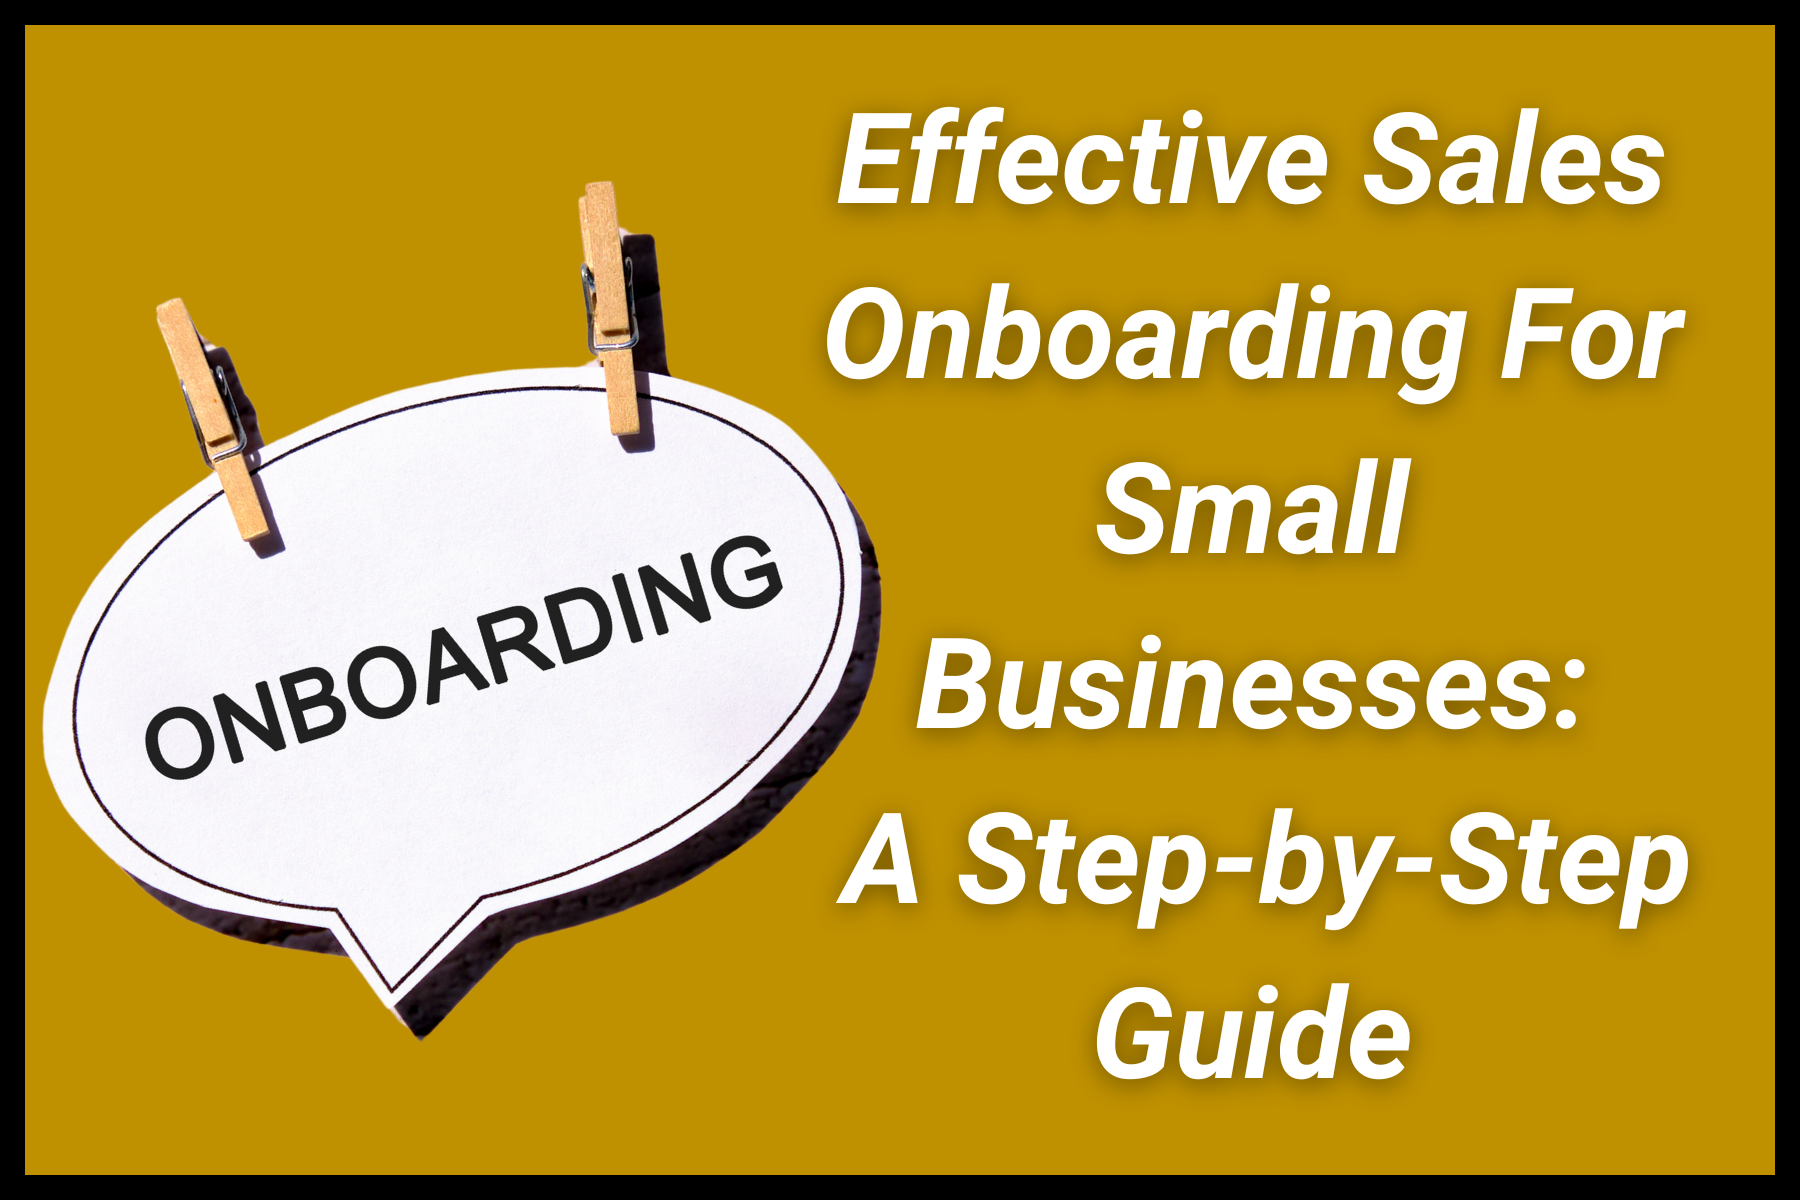 Effective Sales Onboarding For Small Businesses: A Step-by-Step Guide